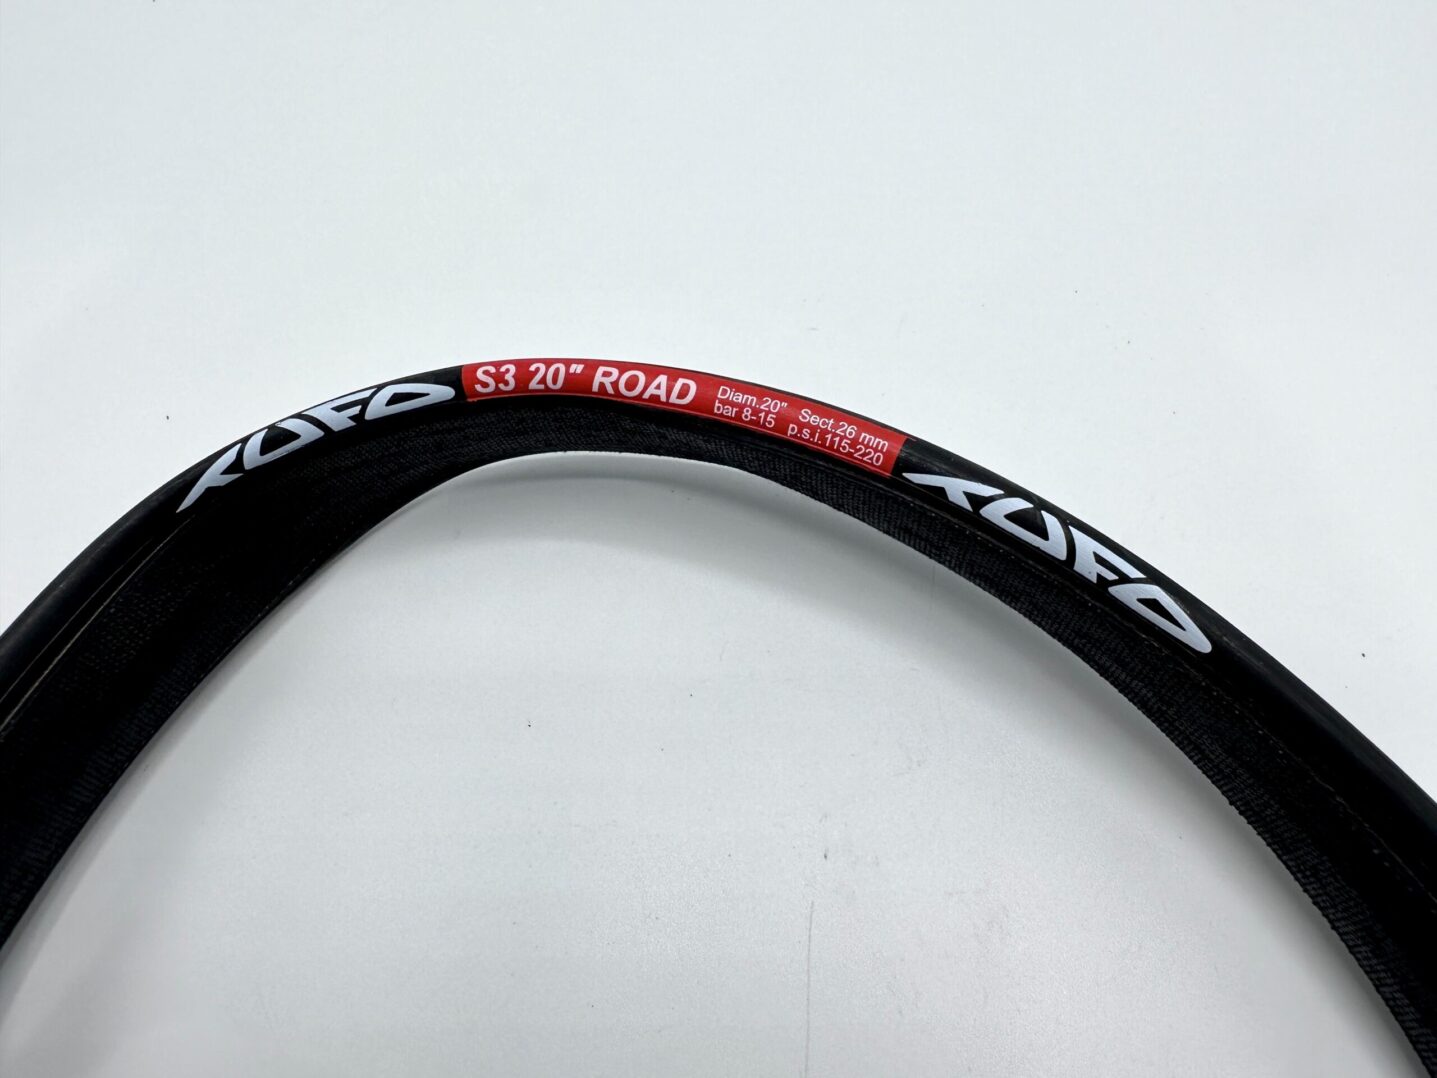 A close up of a T TUFU S3 20 Road Black TUBULAR TIRE on a white surface.